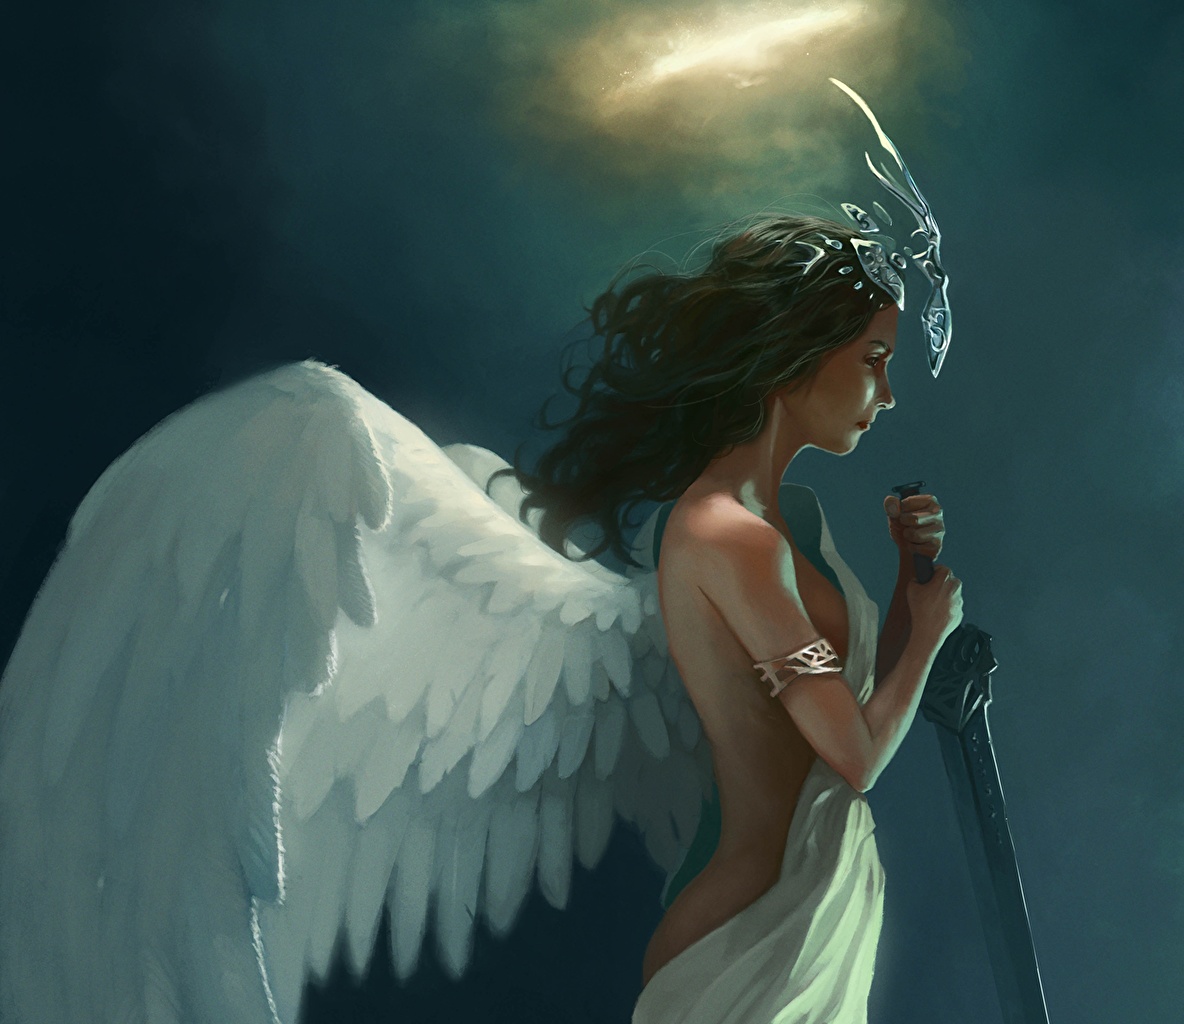 Angel With Halo Girl - HD Wallpaper 